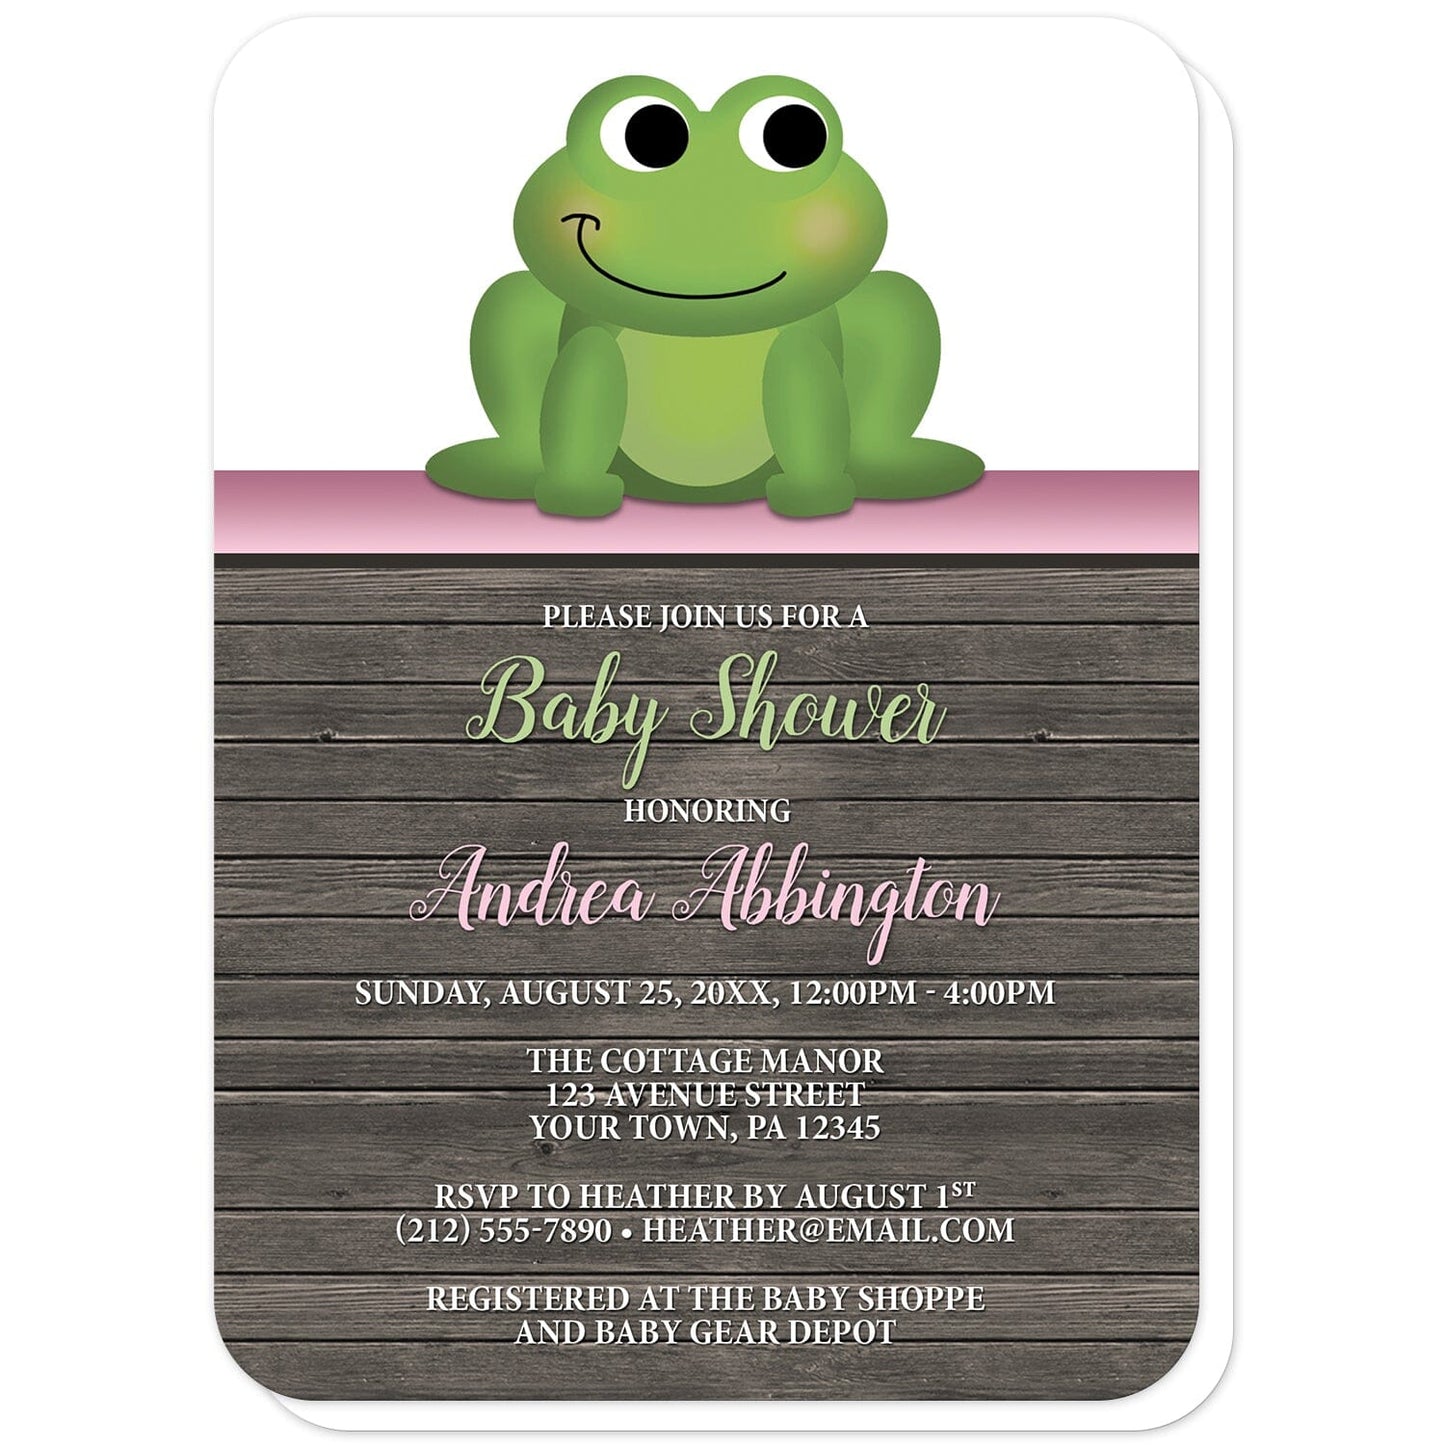 Cute Frog Green Pink Rustic Wood Baby Shower Invitations (with rounded corners) at Artistically Invited. Cute frog green pink rustic wood baby shower invitations with an illustration of an adorable green frog. A pink stripe separates the cute frog from your personalized celebration details which are custom printed in pink, green, and white over a rustic brown wood background.